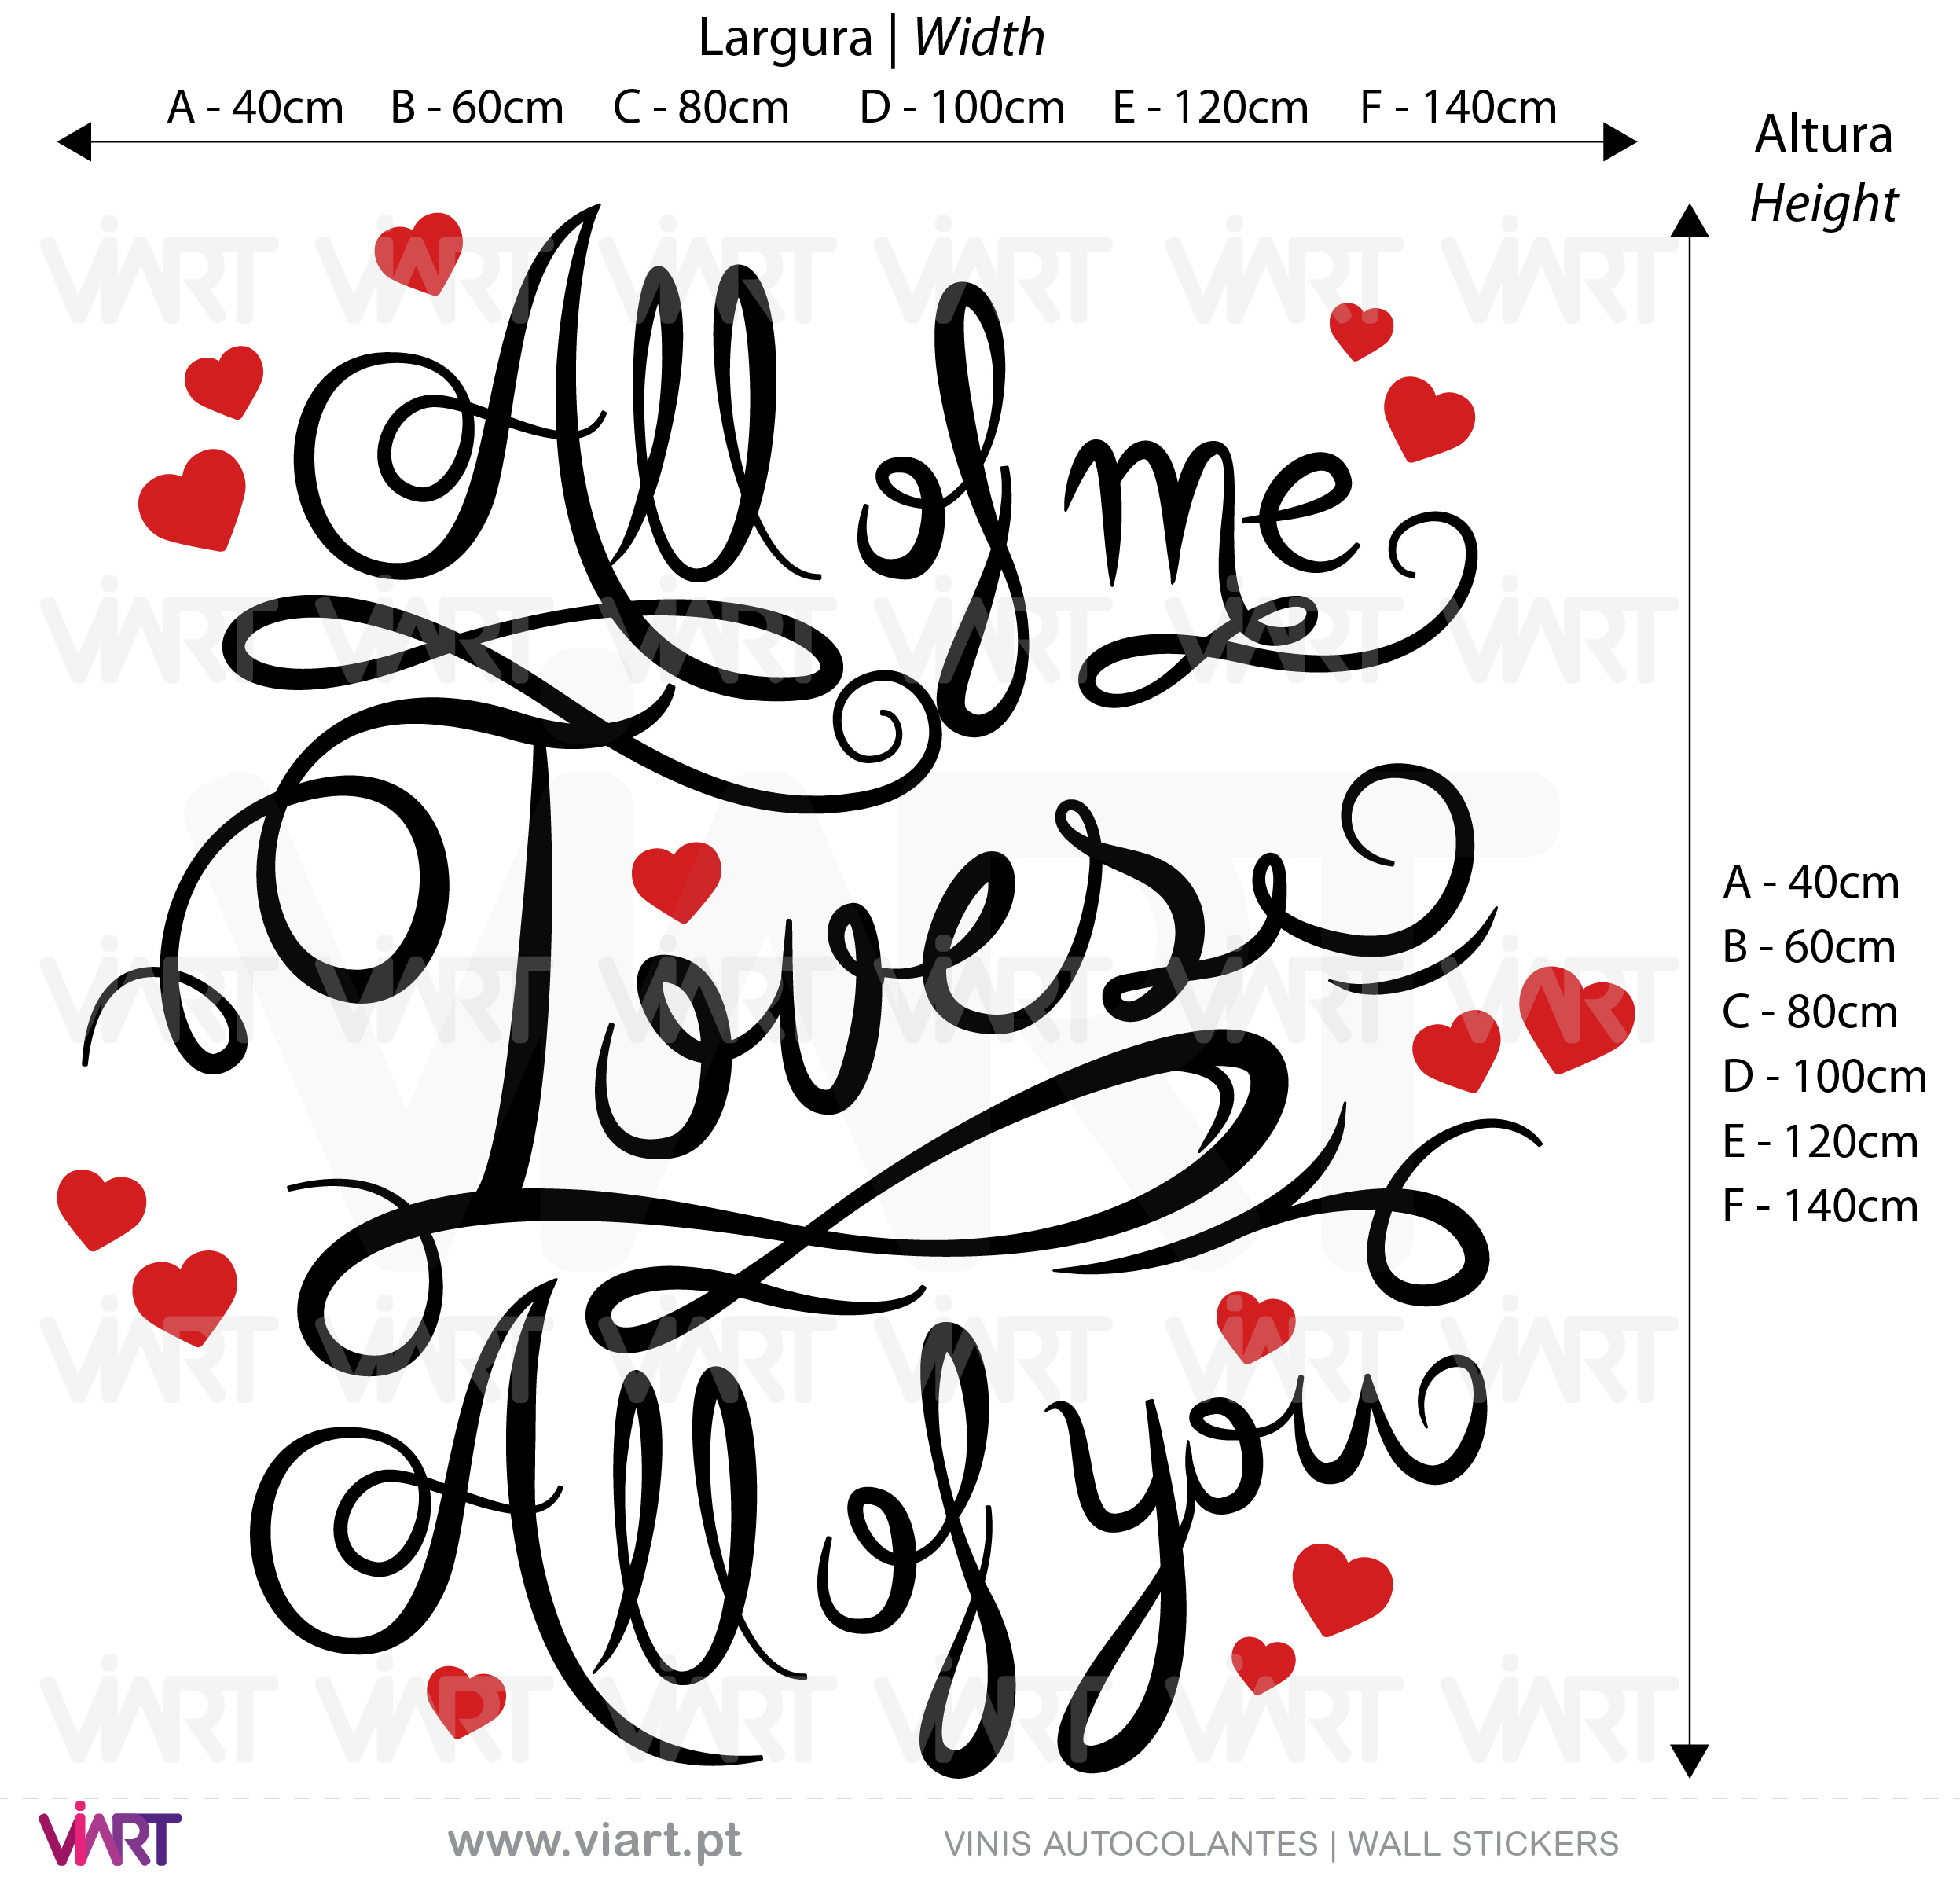 All of me Loves All of you! Viart - Wall Stickers - Decals